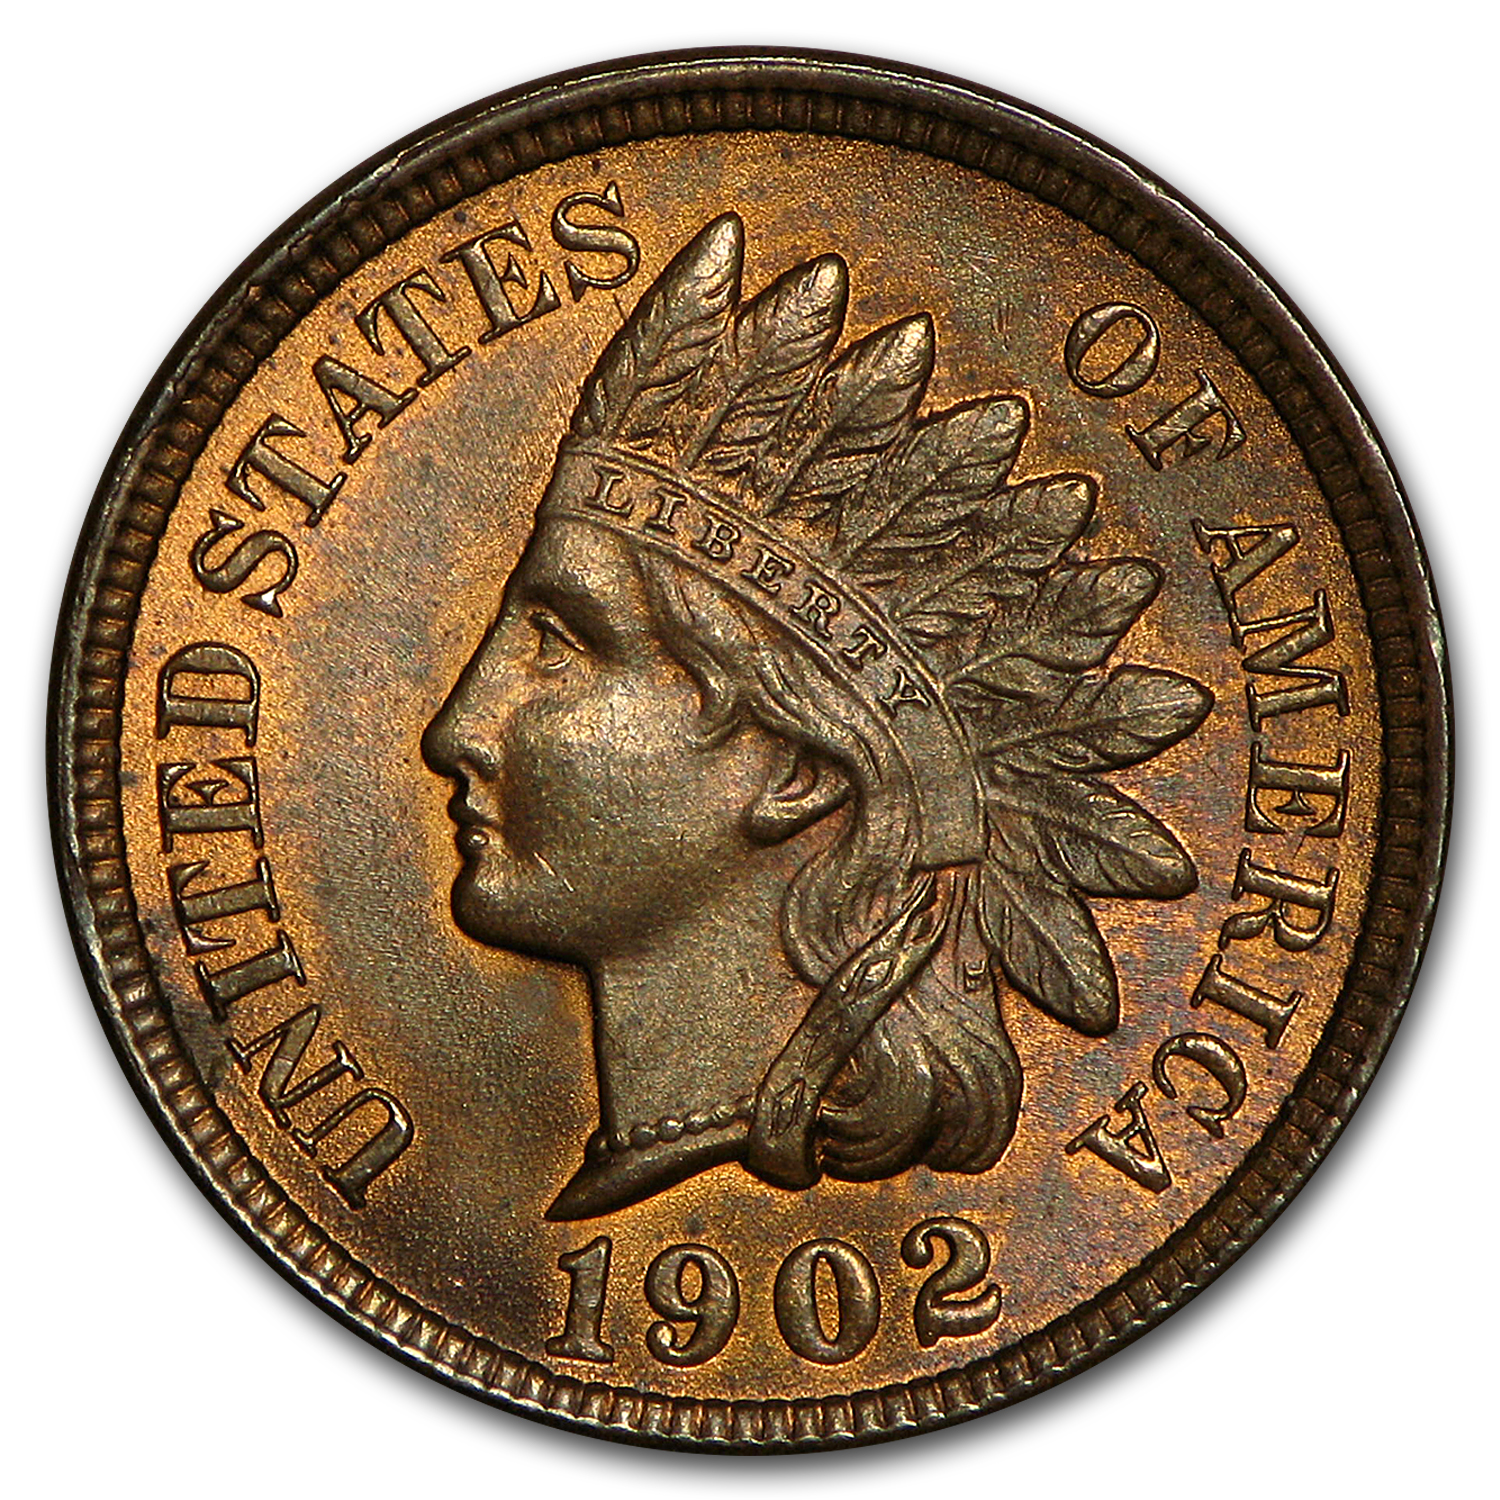 Buy 1902 Indian Head Cent BU (Red/Brown)